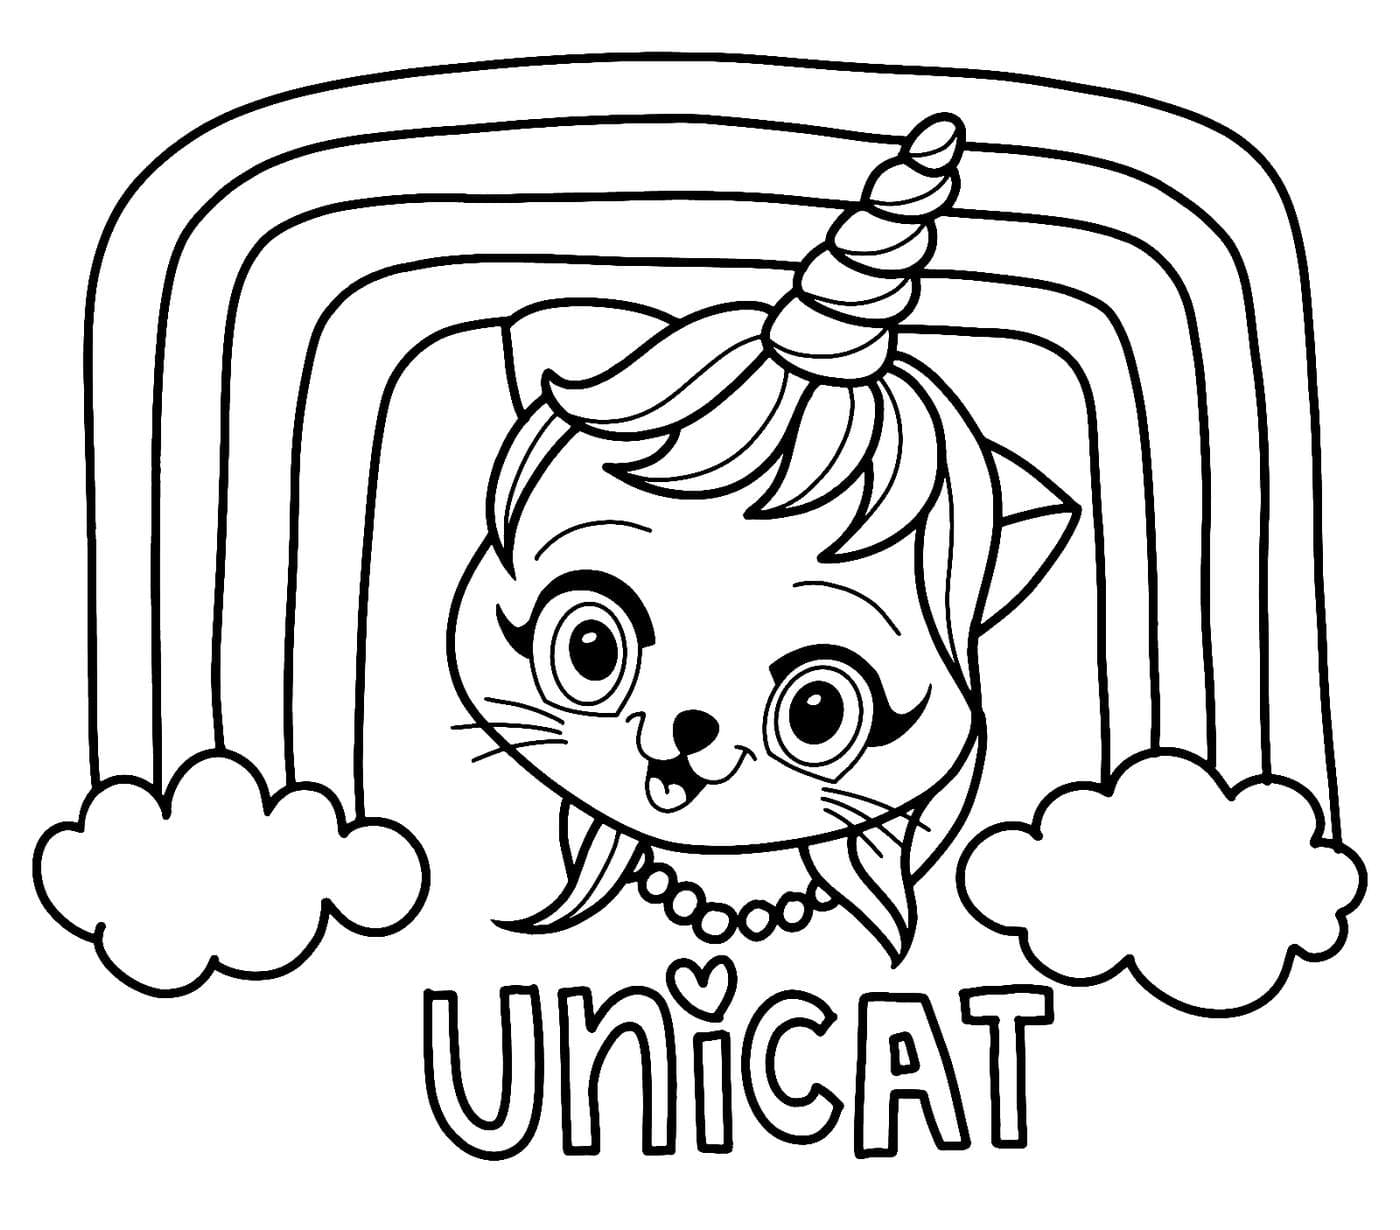 Coloring page Unicorn Cat for kids